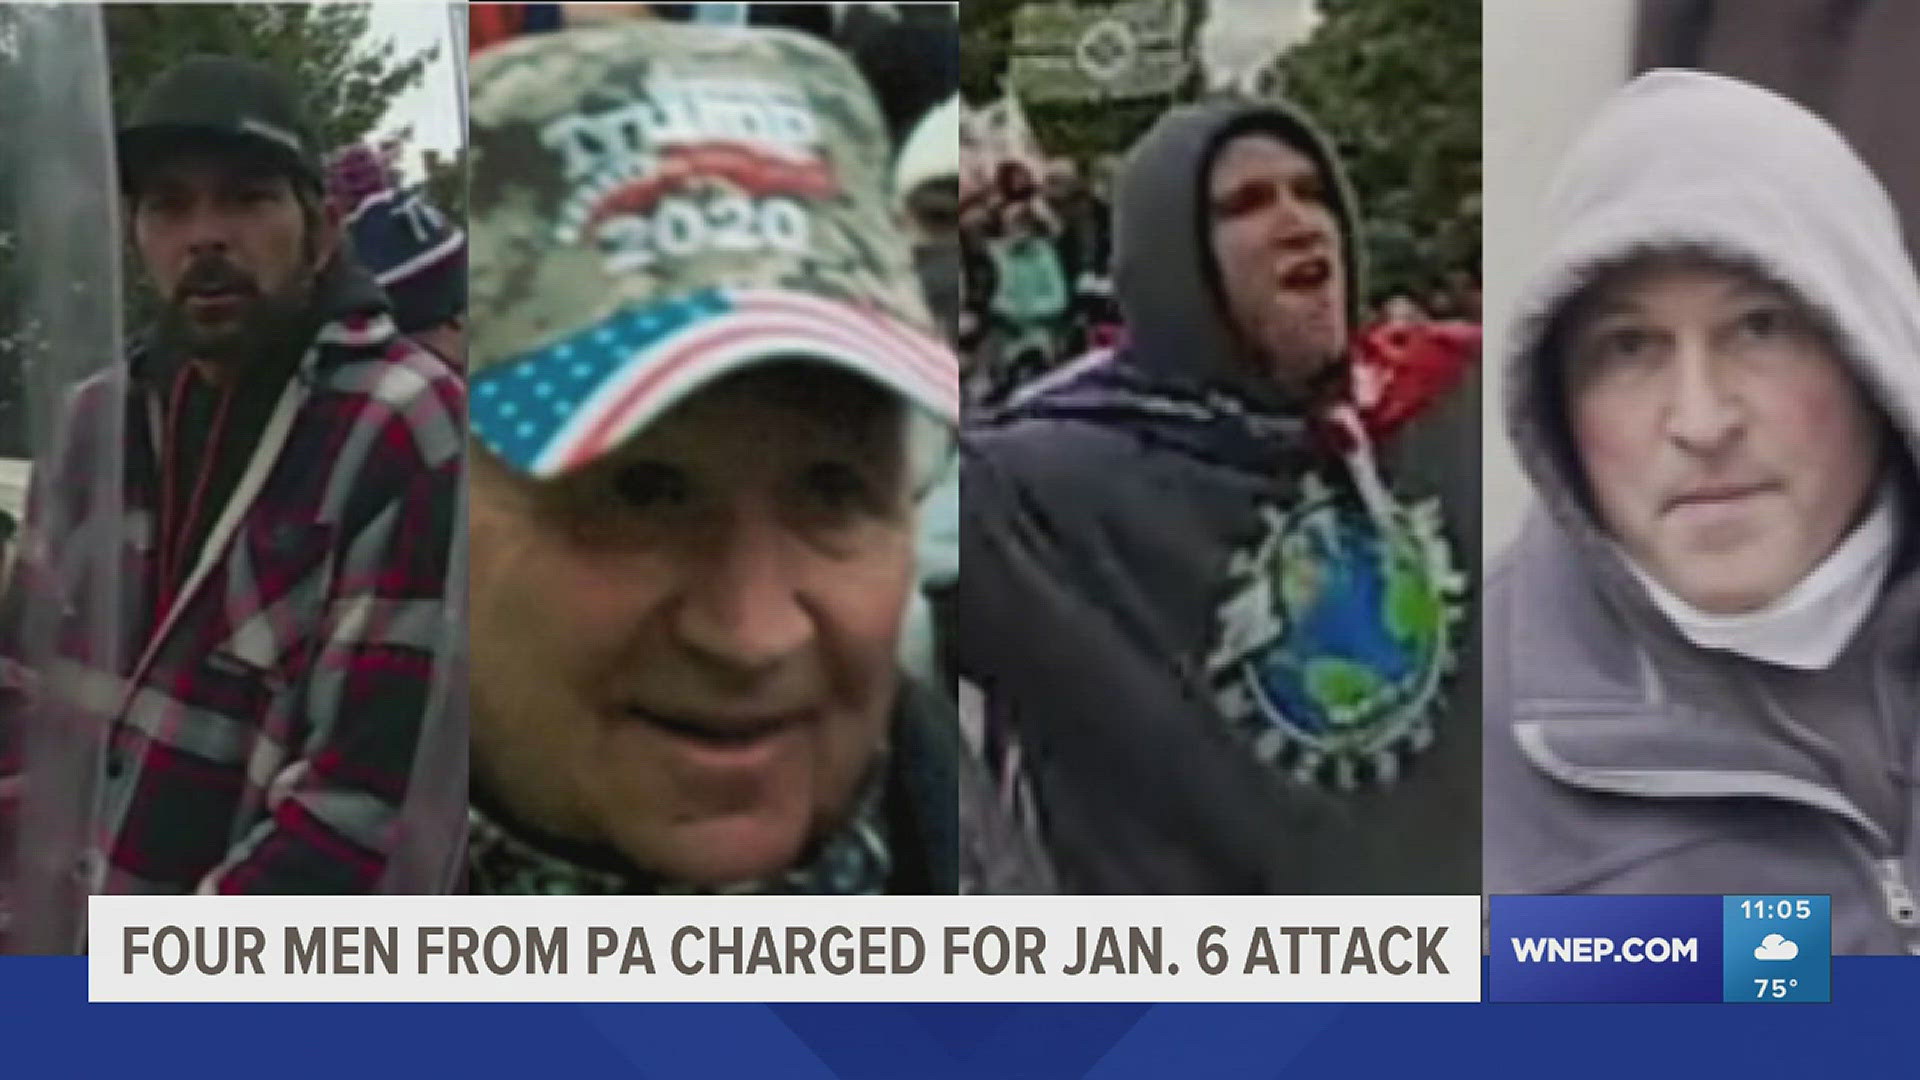 Three men from Saylorsburg and one from Pen Argyl have been charged in connection with the violent protests at the Capitol on January 6, 2021.